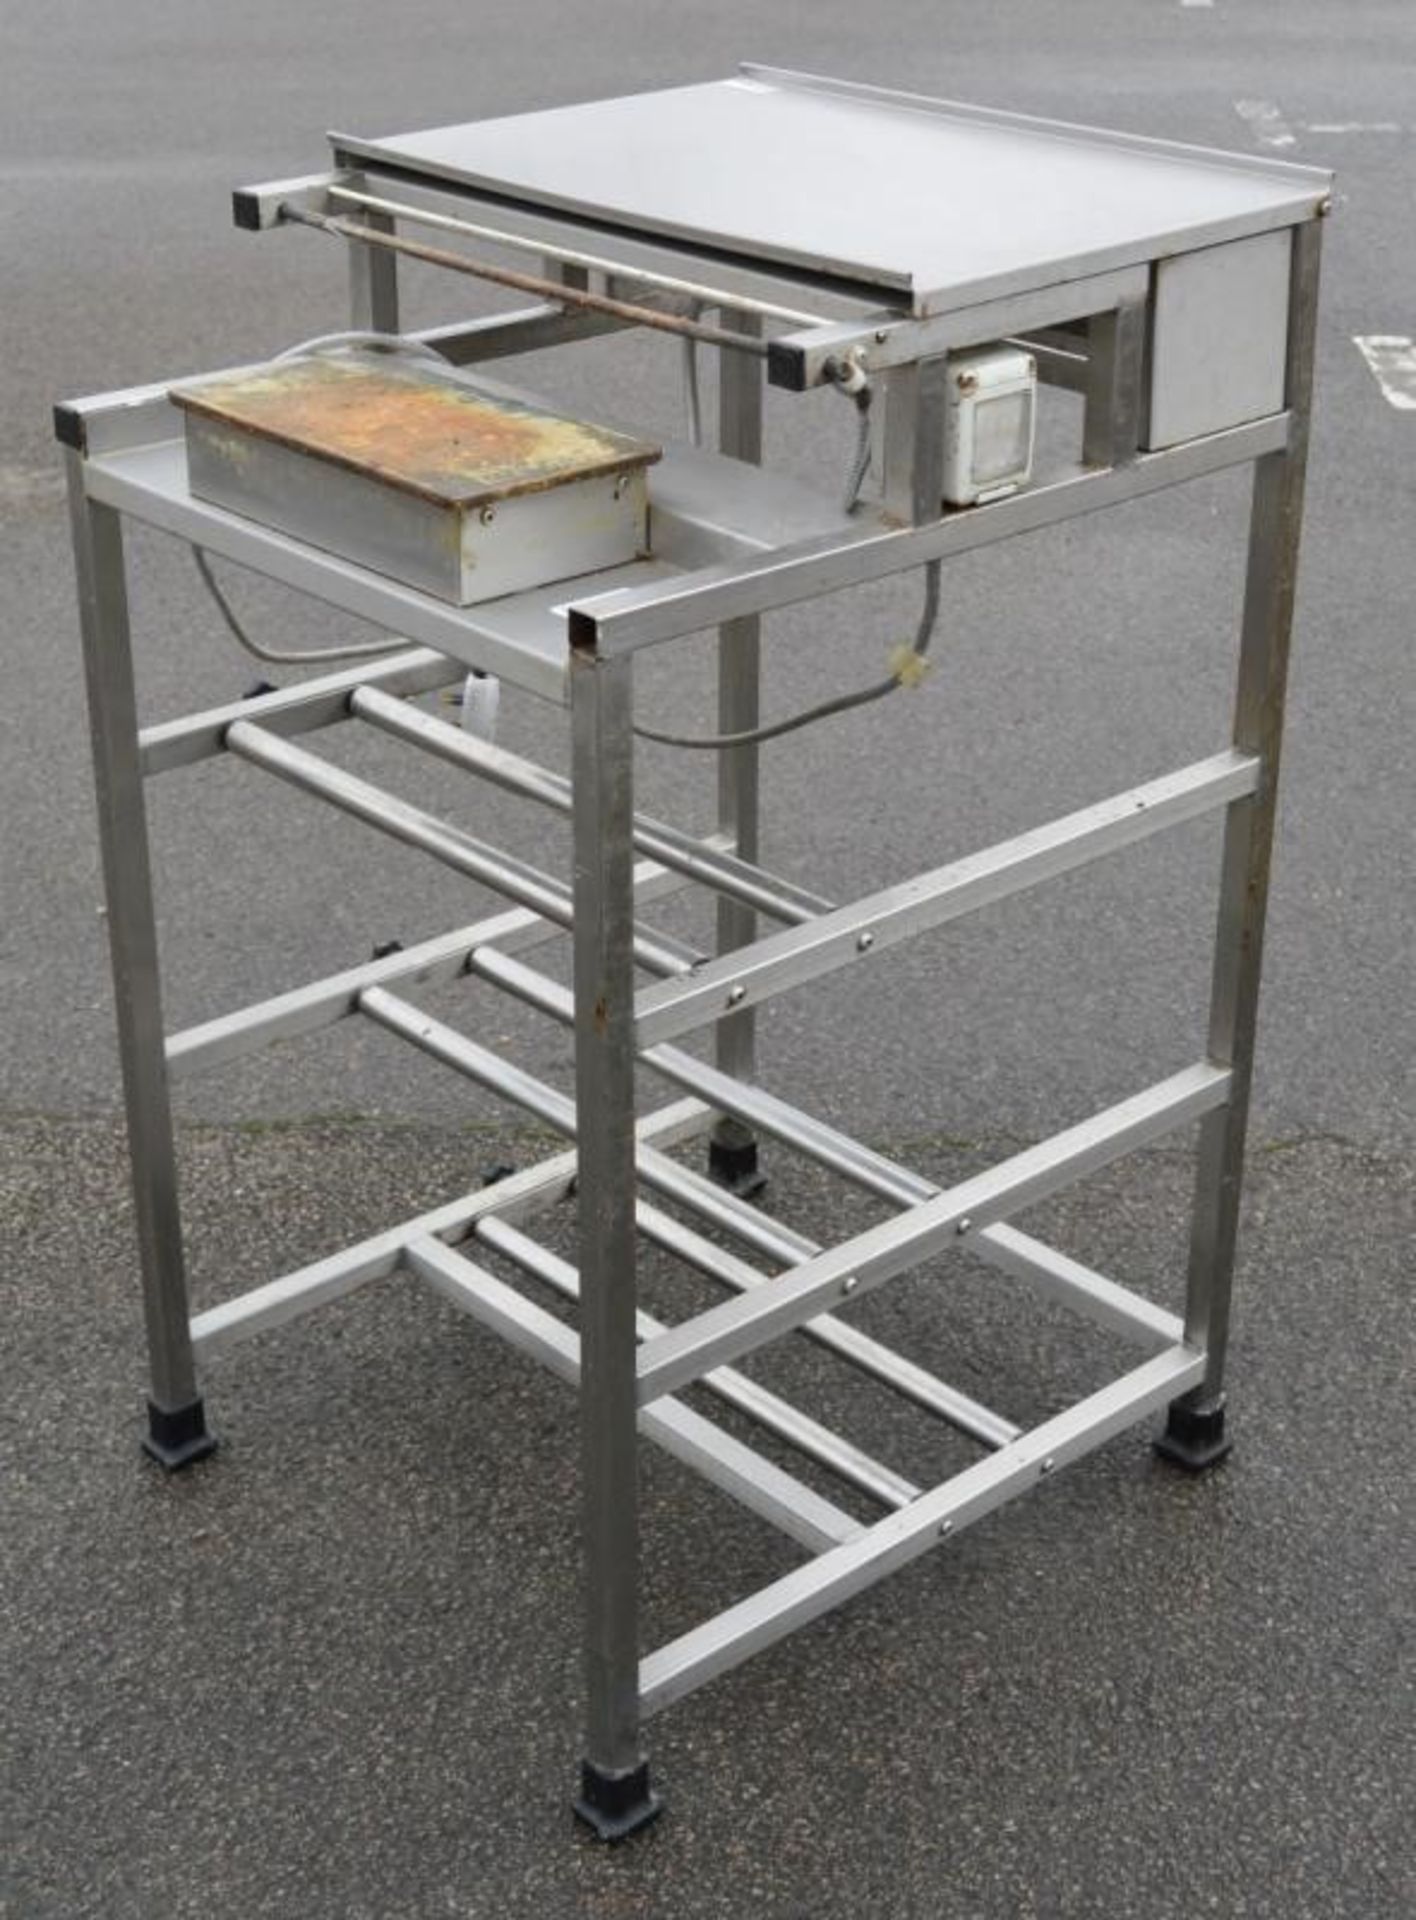 1 x Freestanding Stretch Wrap Tray Overwapper Machine - Stainless Steel Constructons - 240v - CL282